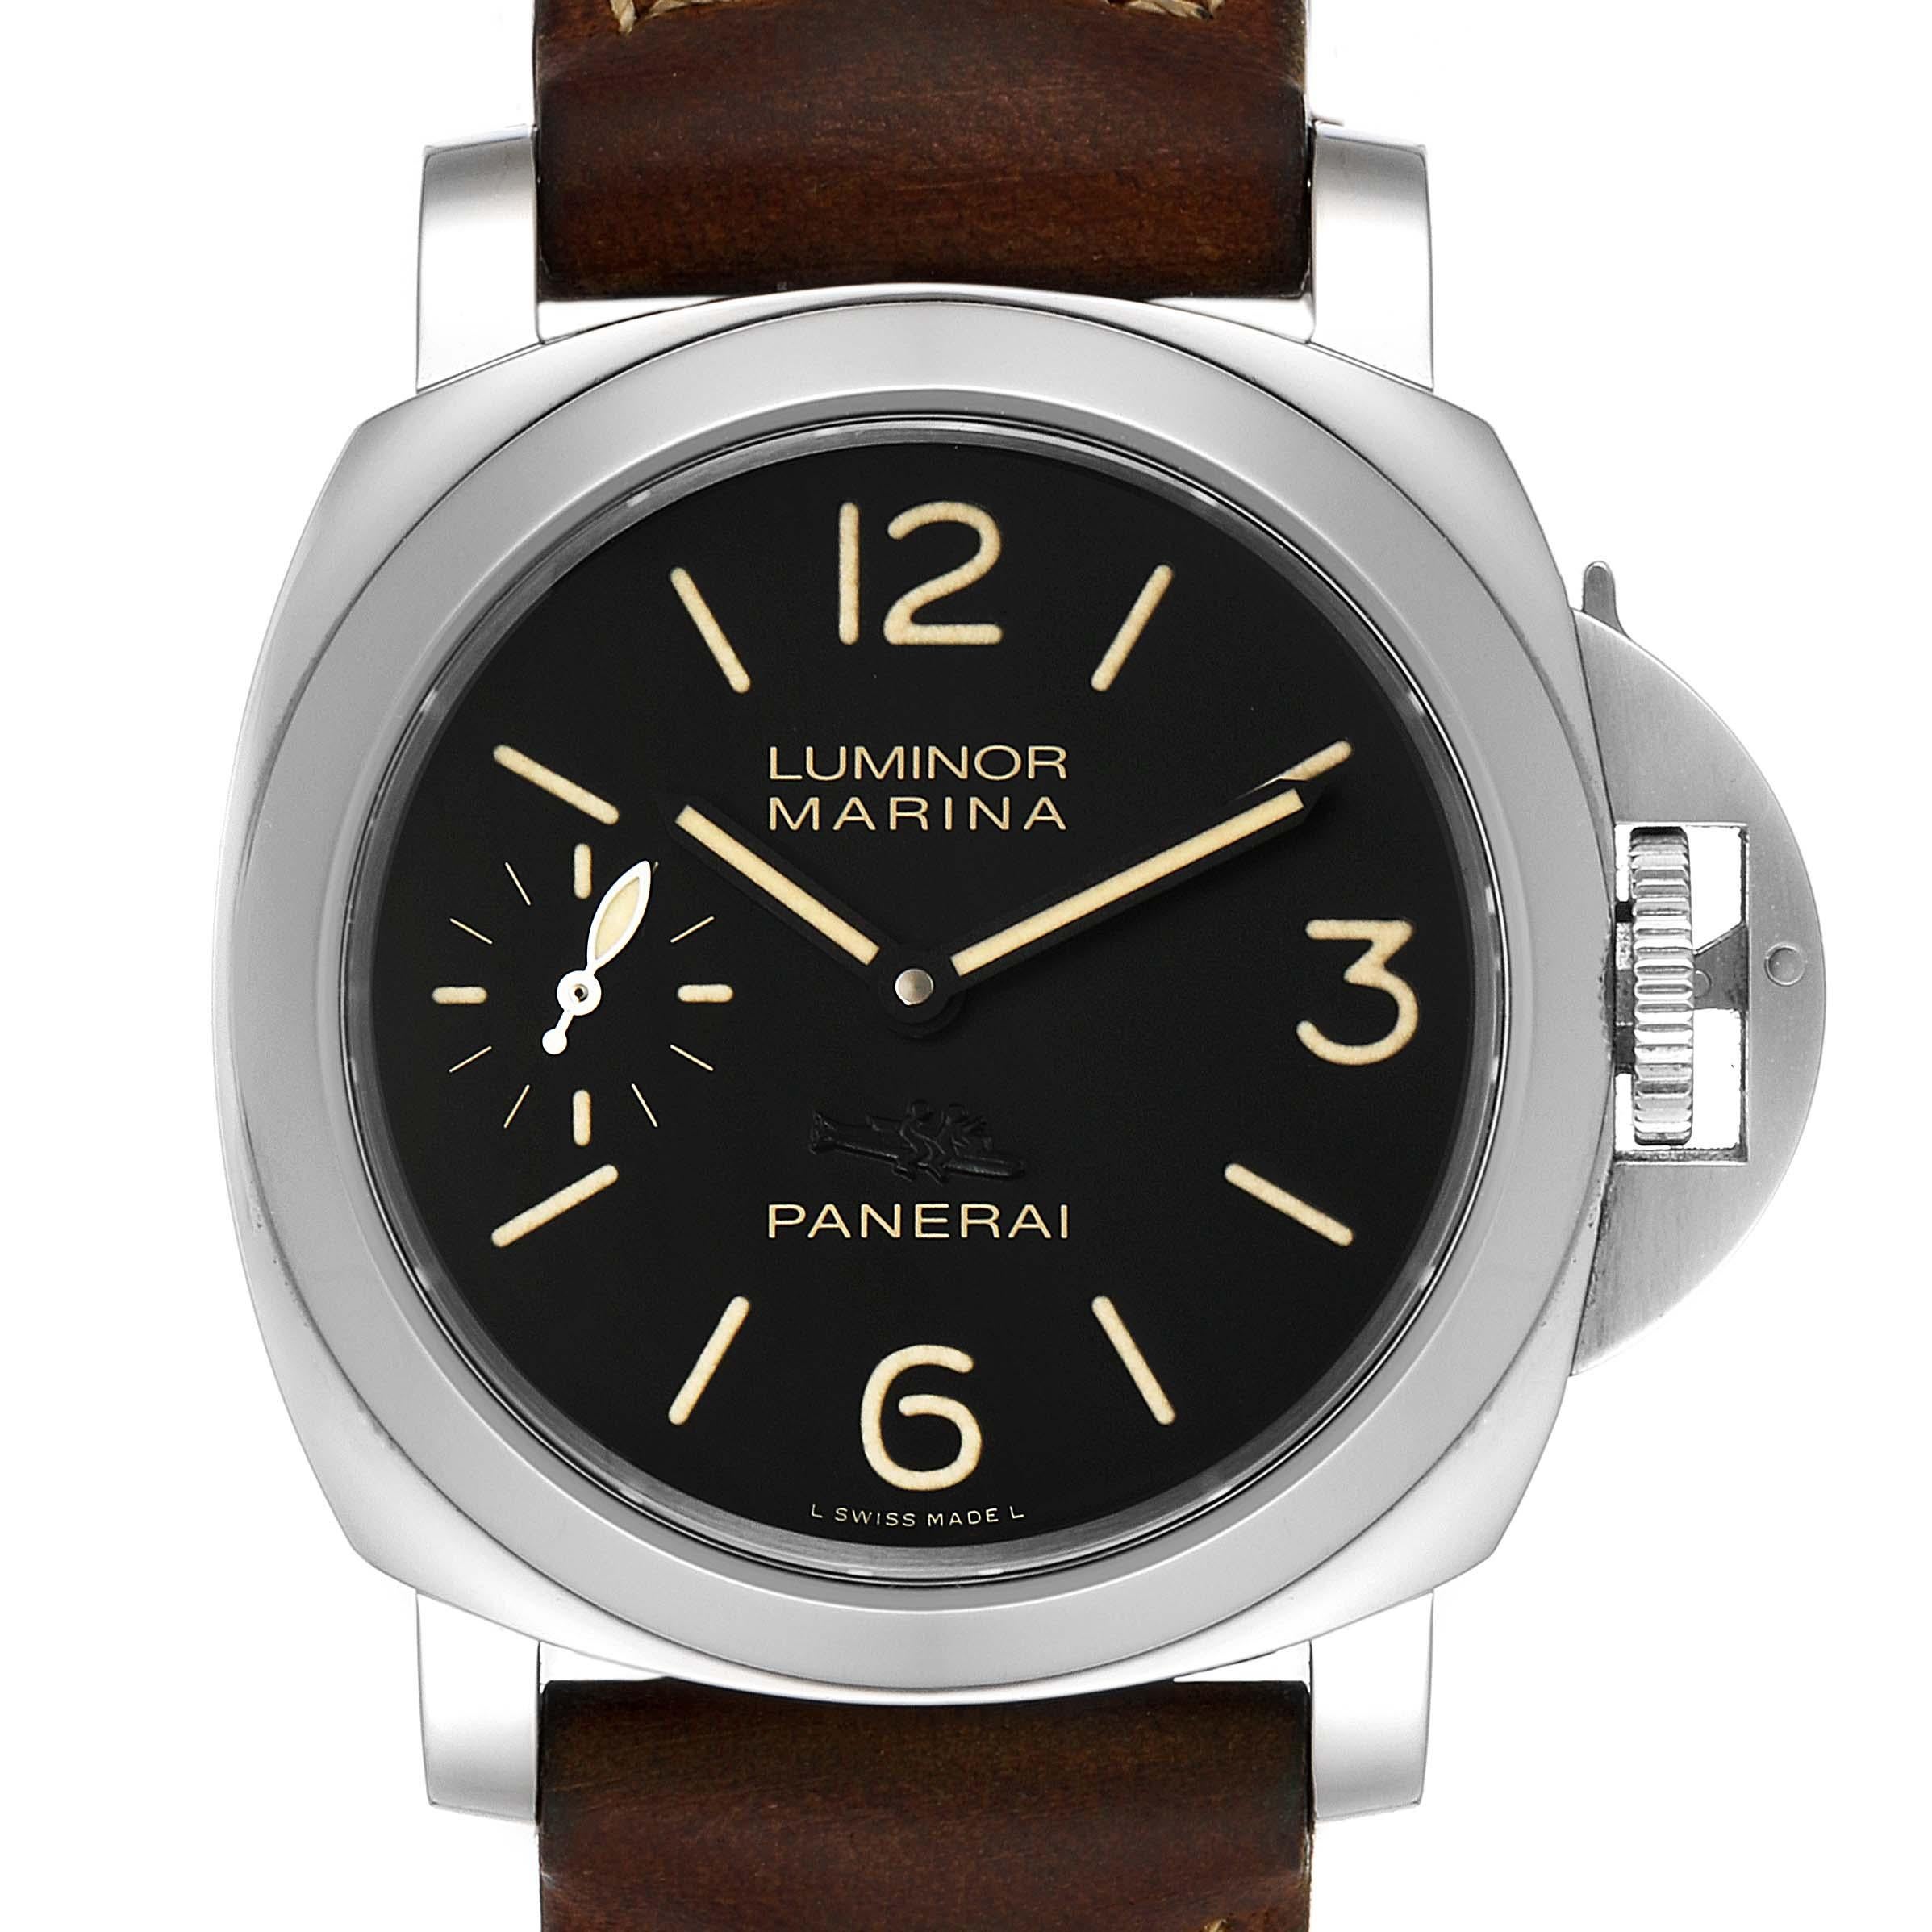 Panerai Luminor Marina Acciaio 44mm Steel Mens Watch PAM00415. Manual-winding movement with glucydur balance, 21,600 alternations per hour and incabloc anti-shock device. Two part cushion shaped polished stainless steel case 44.0 mm in diameter.